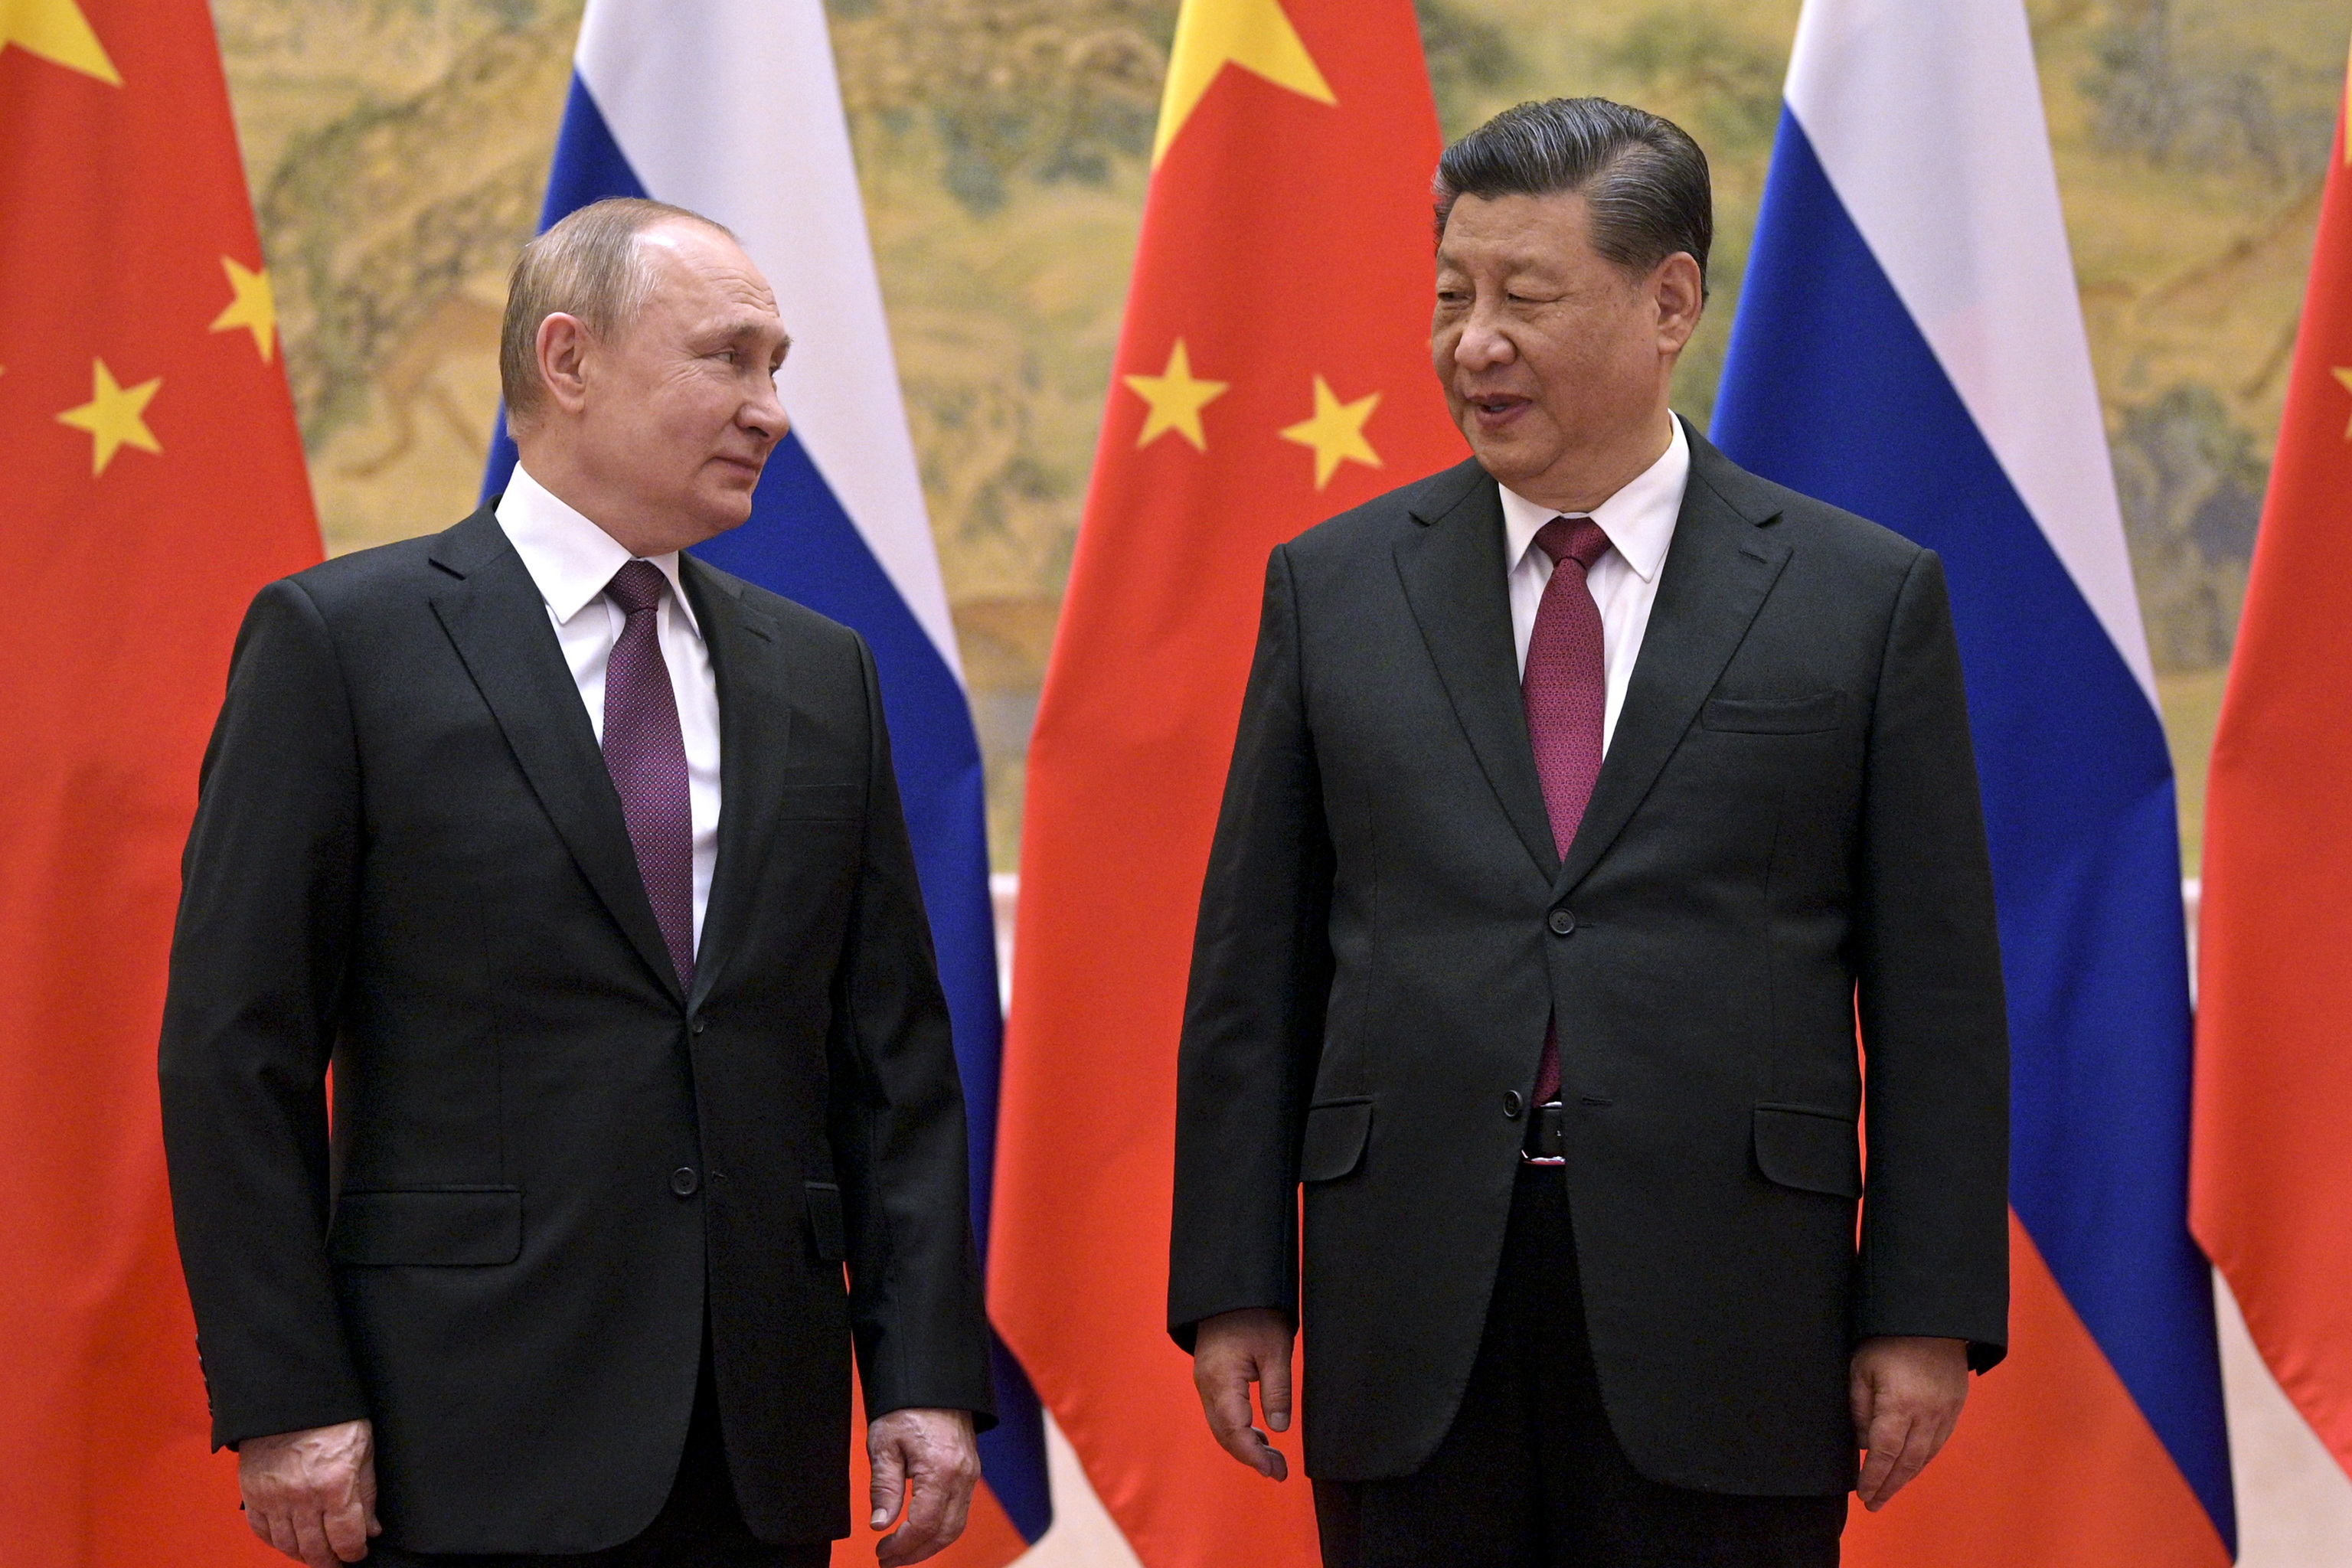 Both Russia and China are magnets for authoritarian leaders in other parts of the world.